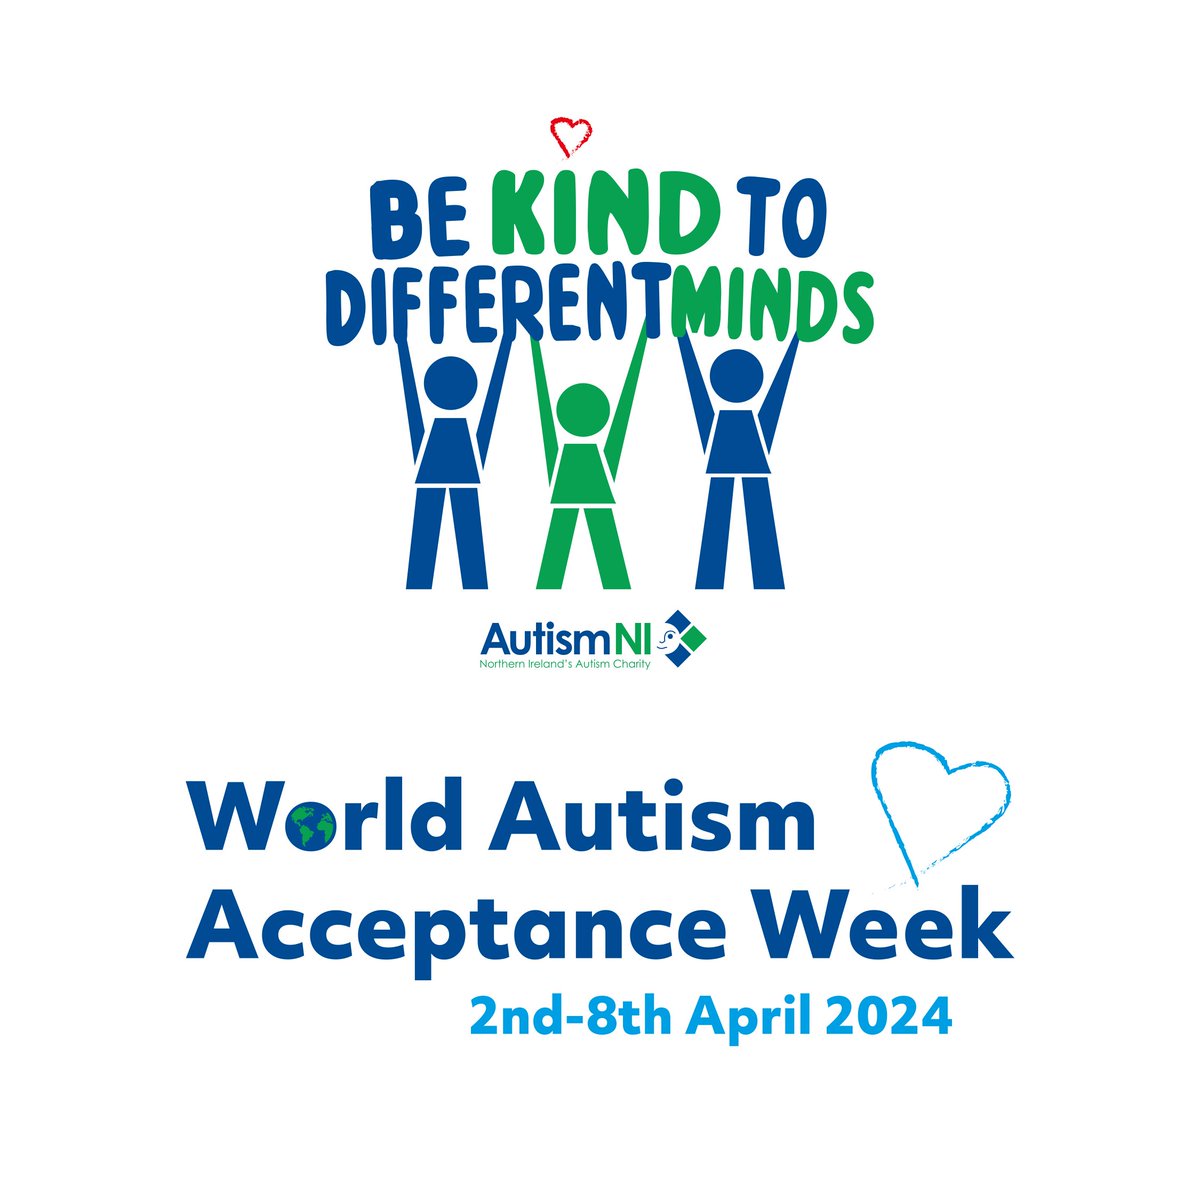 Everyone is accepted in Malone everyday, however this week we would like to highlight the message #BeKindToDifferentMinds and recognise #AutismAcceptanceWeek 💚💙 @AutismNIPAPA